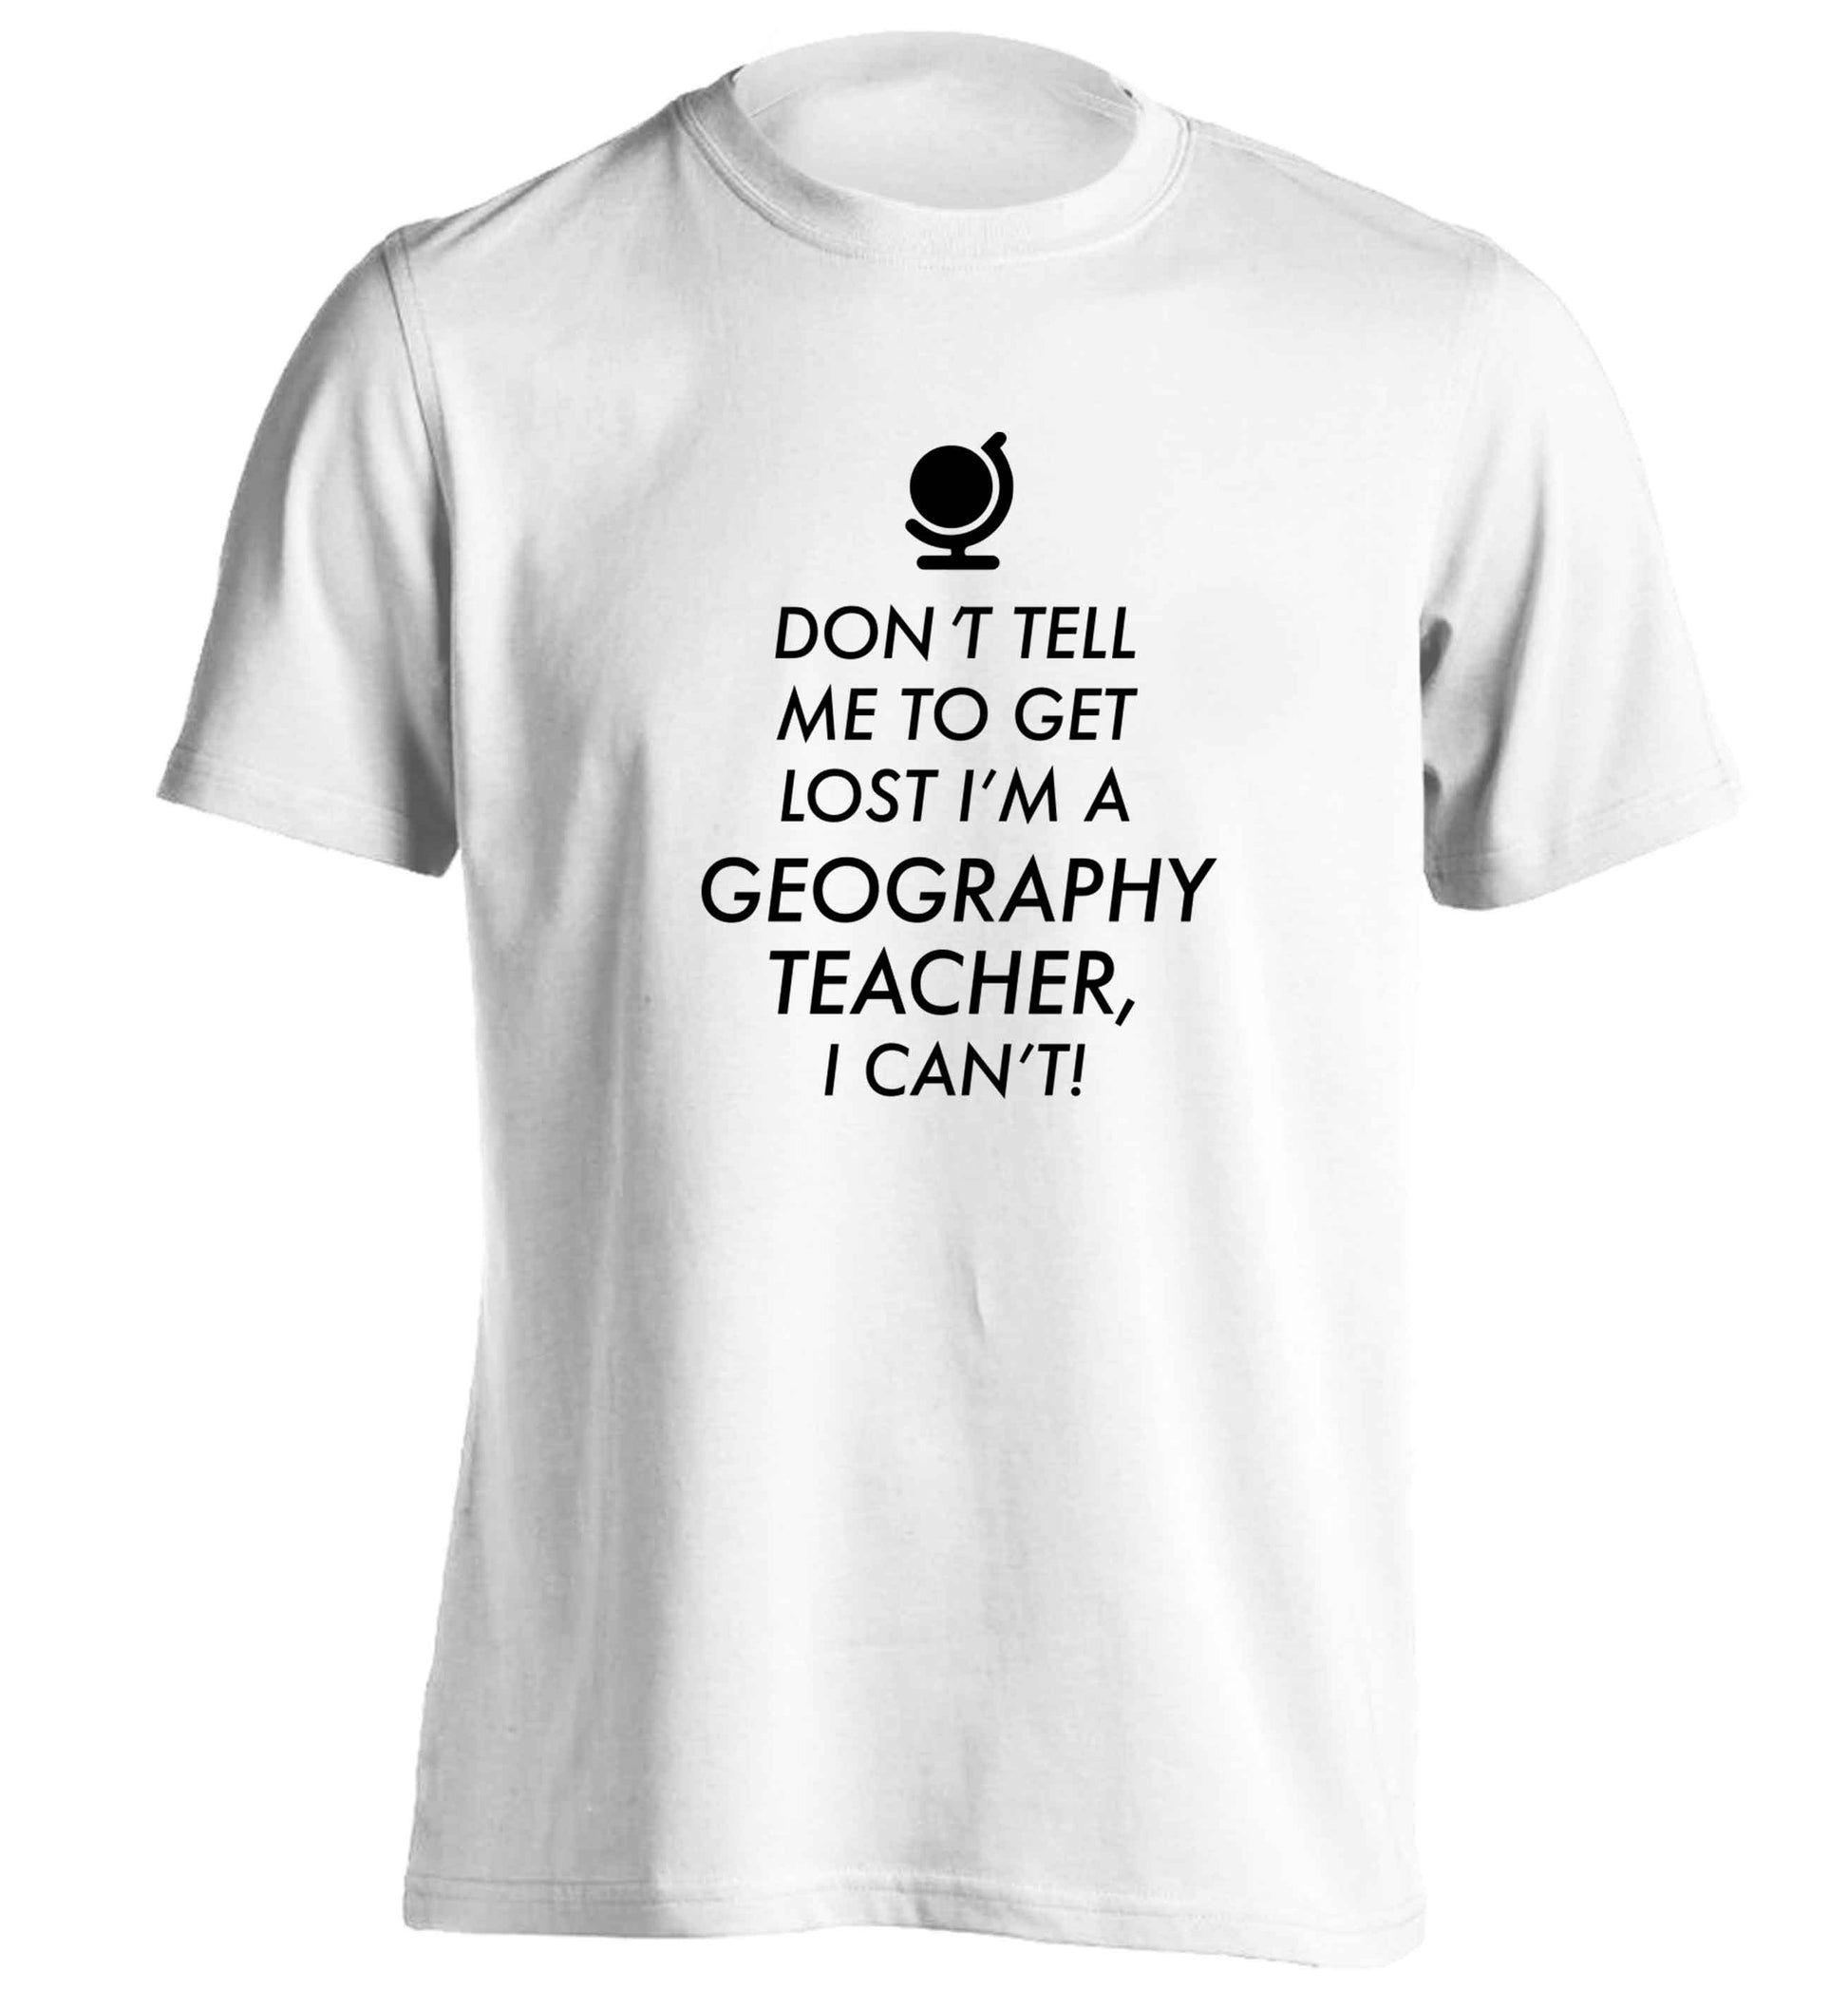 Don't tell me to get lost I'm a geography teacher, I can't adults unisex white Tshirt 2XL